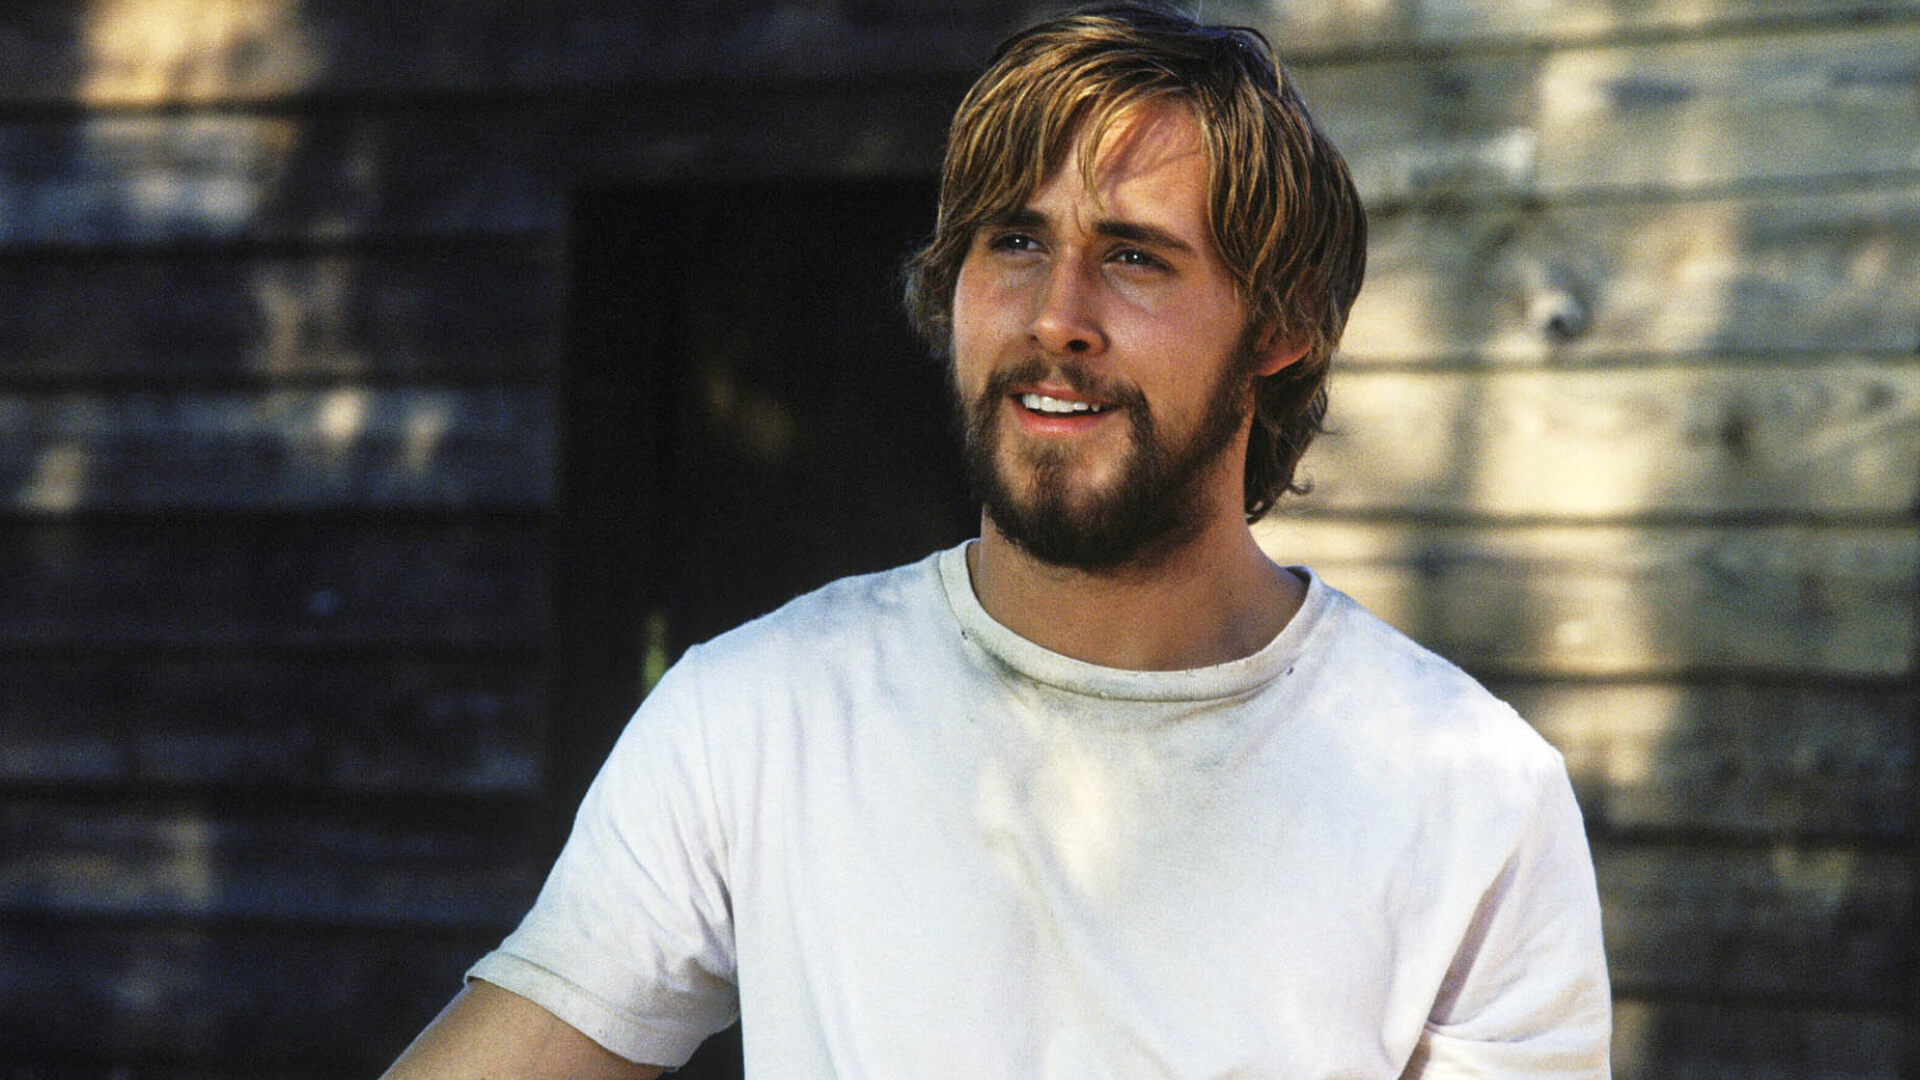 Ryan Gosling in a still from The Notebook (2004)